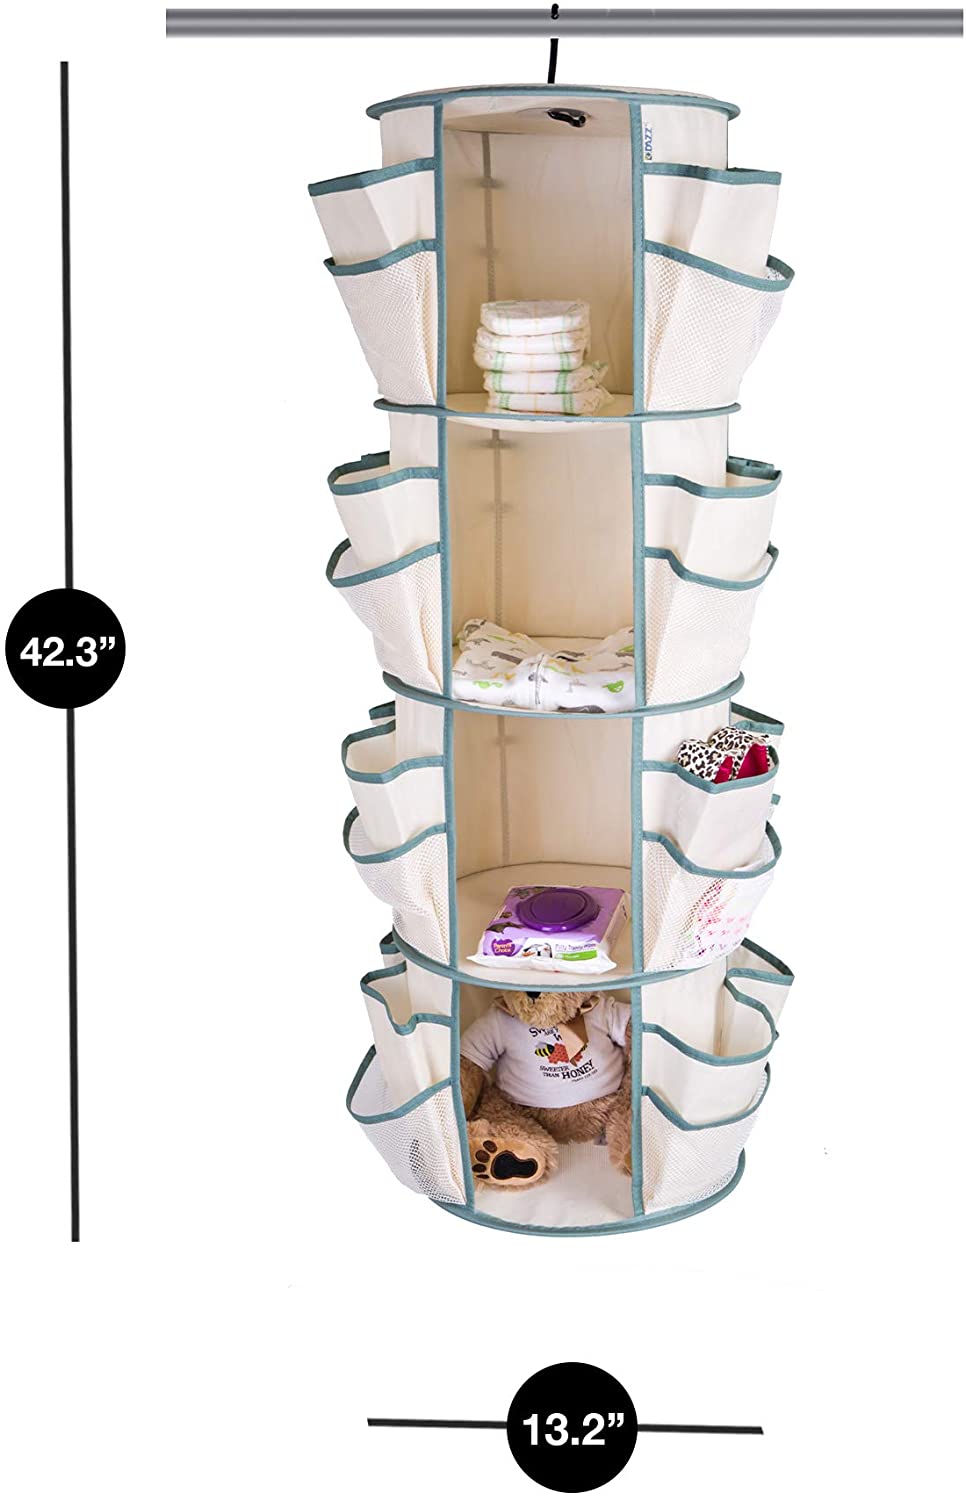 4-Tier Smart Carousel Organizer with Pockets and 360 Degree Swivel - Smart Design® 3